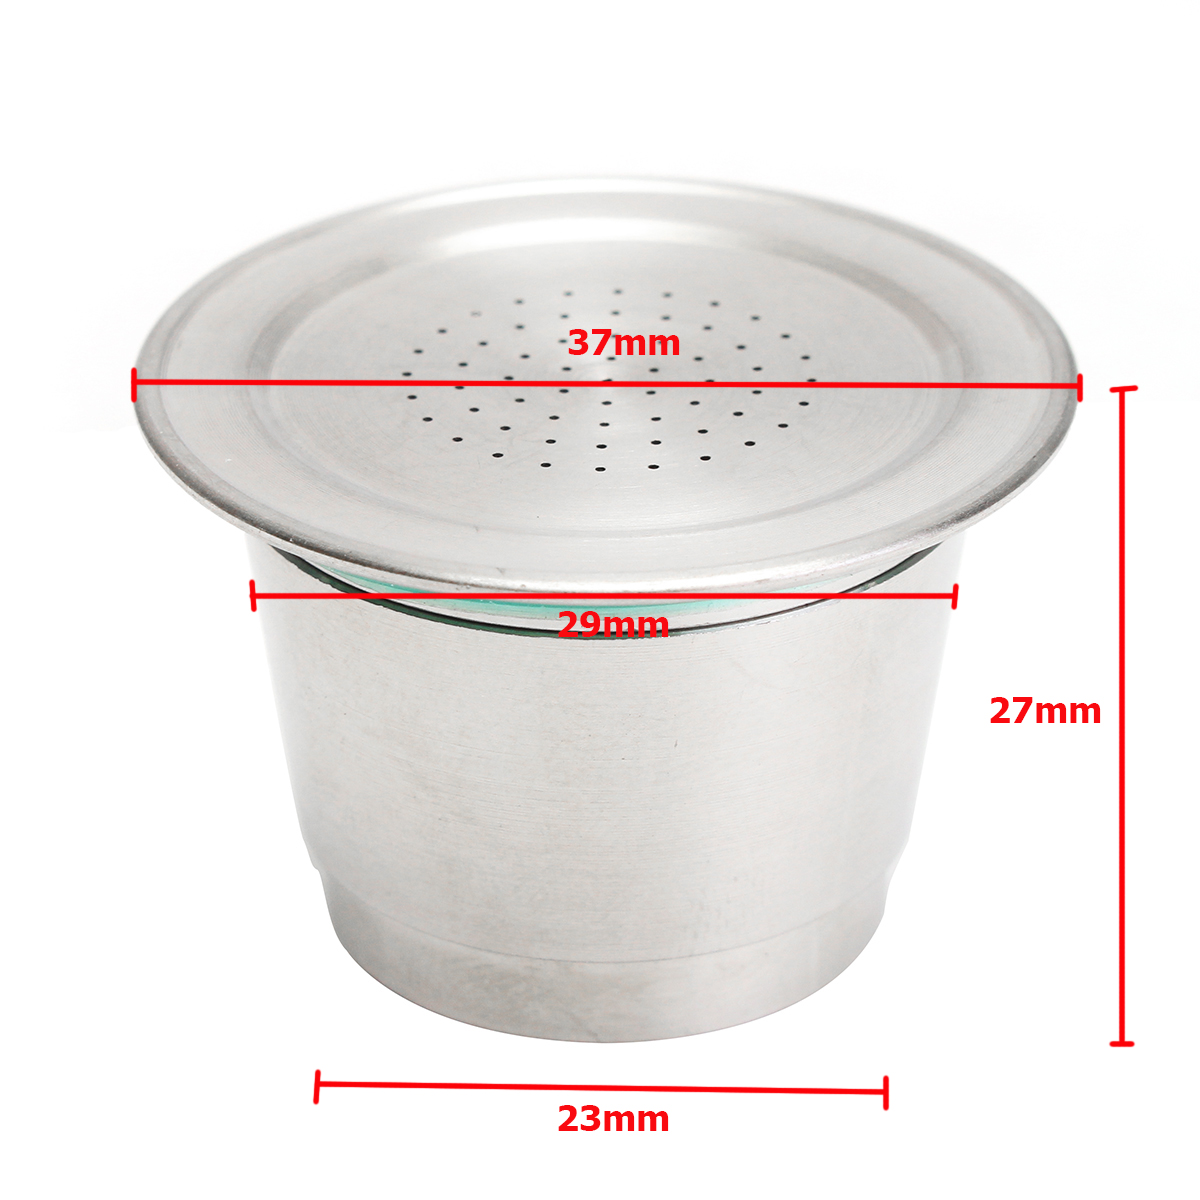 Fine-Grind-Coffee-Capsule-Cup-Stainless-Steel-Reusable-Refillable-For-Nespresso-1268152